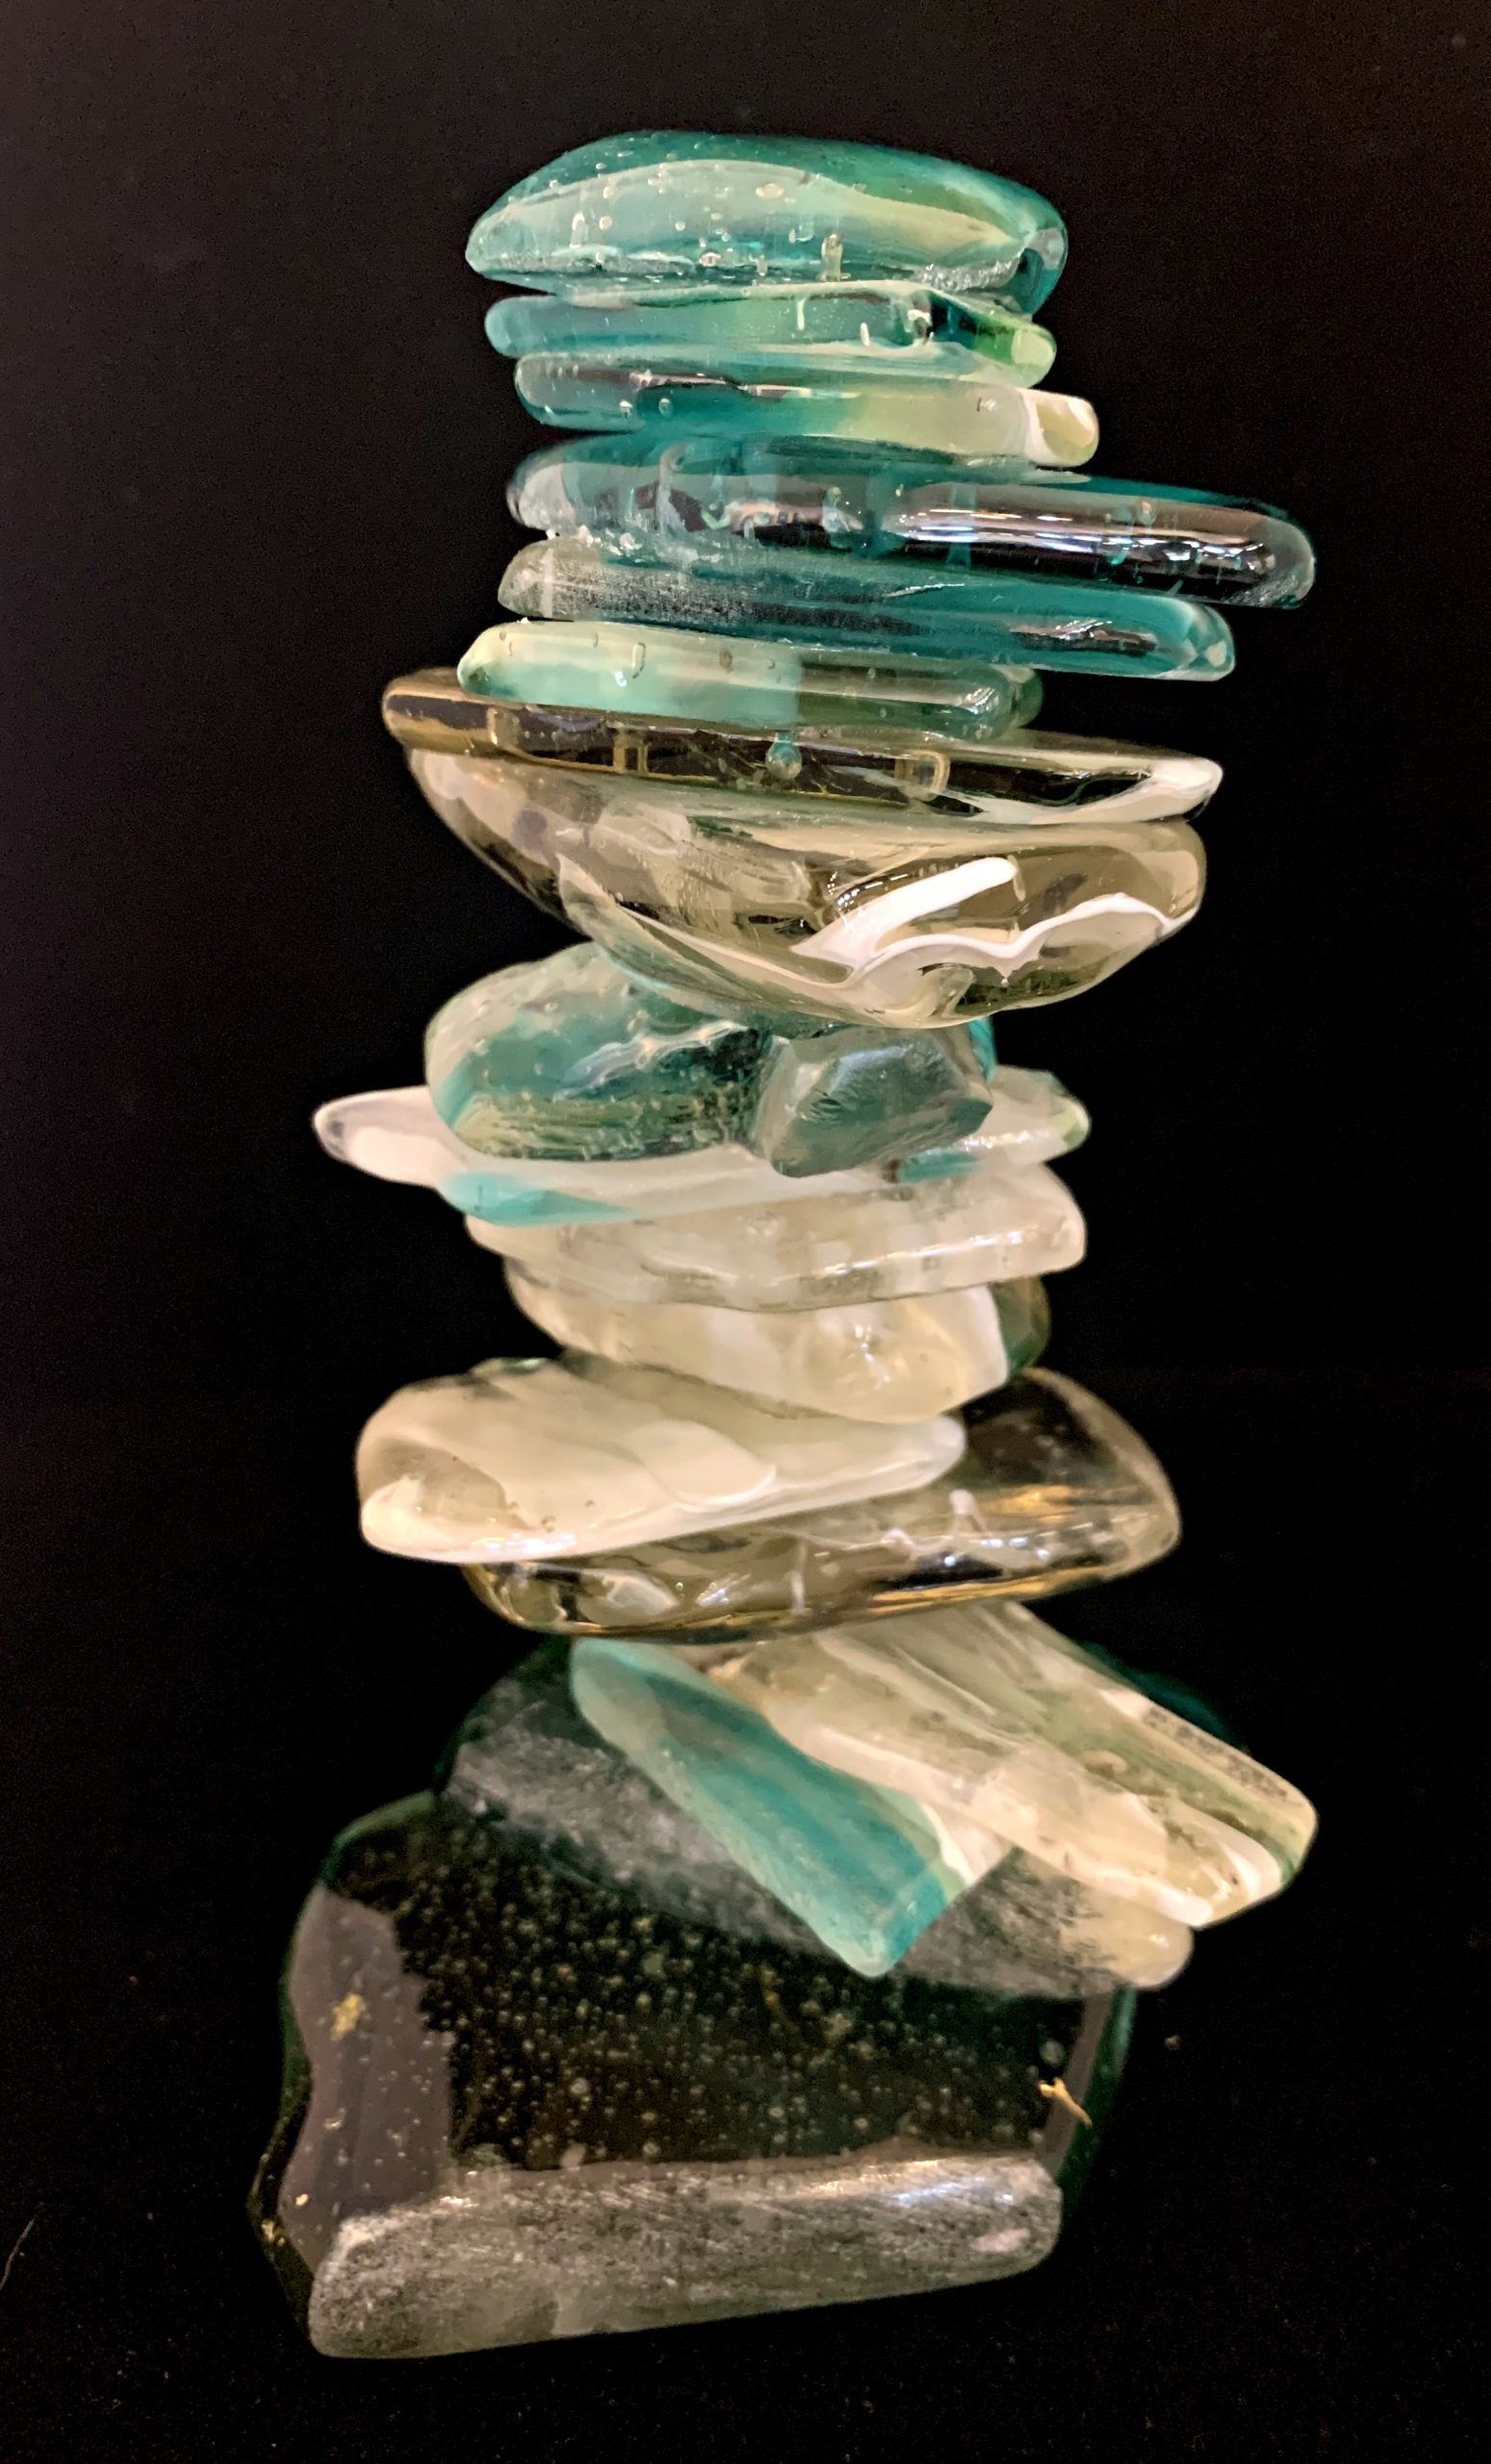 Cast Glass Cairn Sculpture #57 by Heather Cuell | Effusion Art Gallery + Cast Glass Studio, Invermere BC